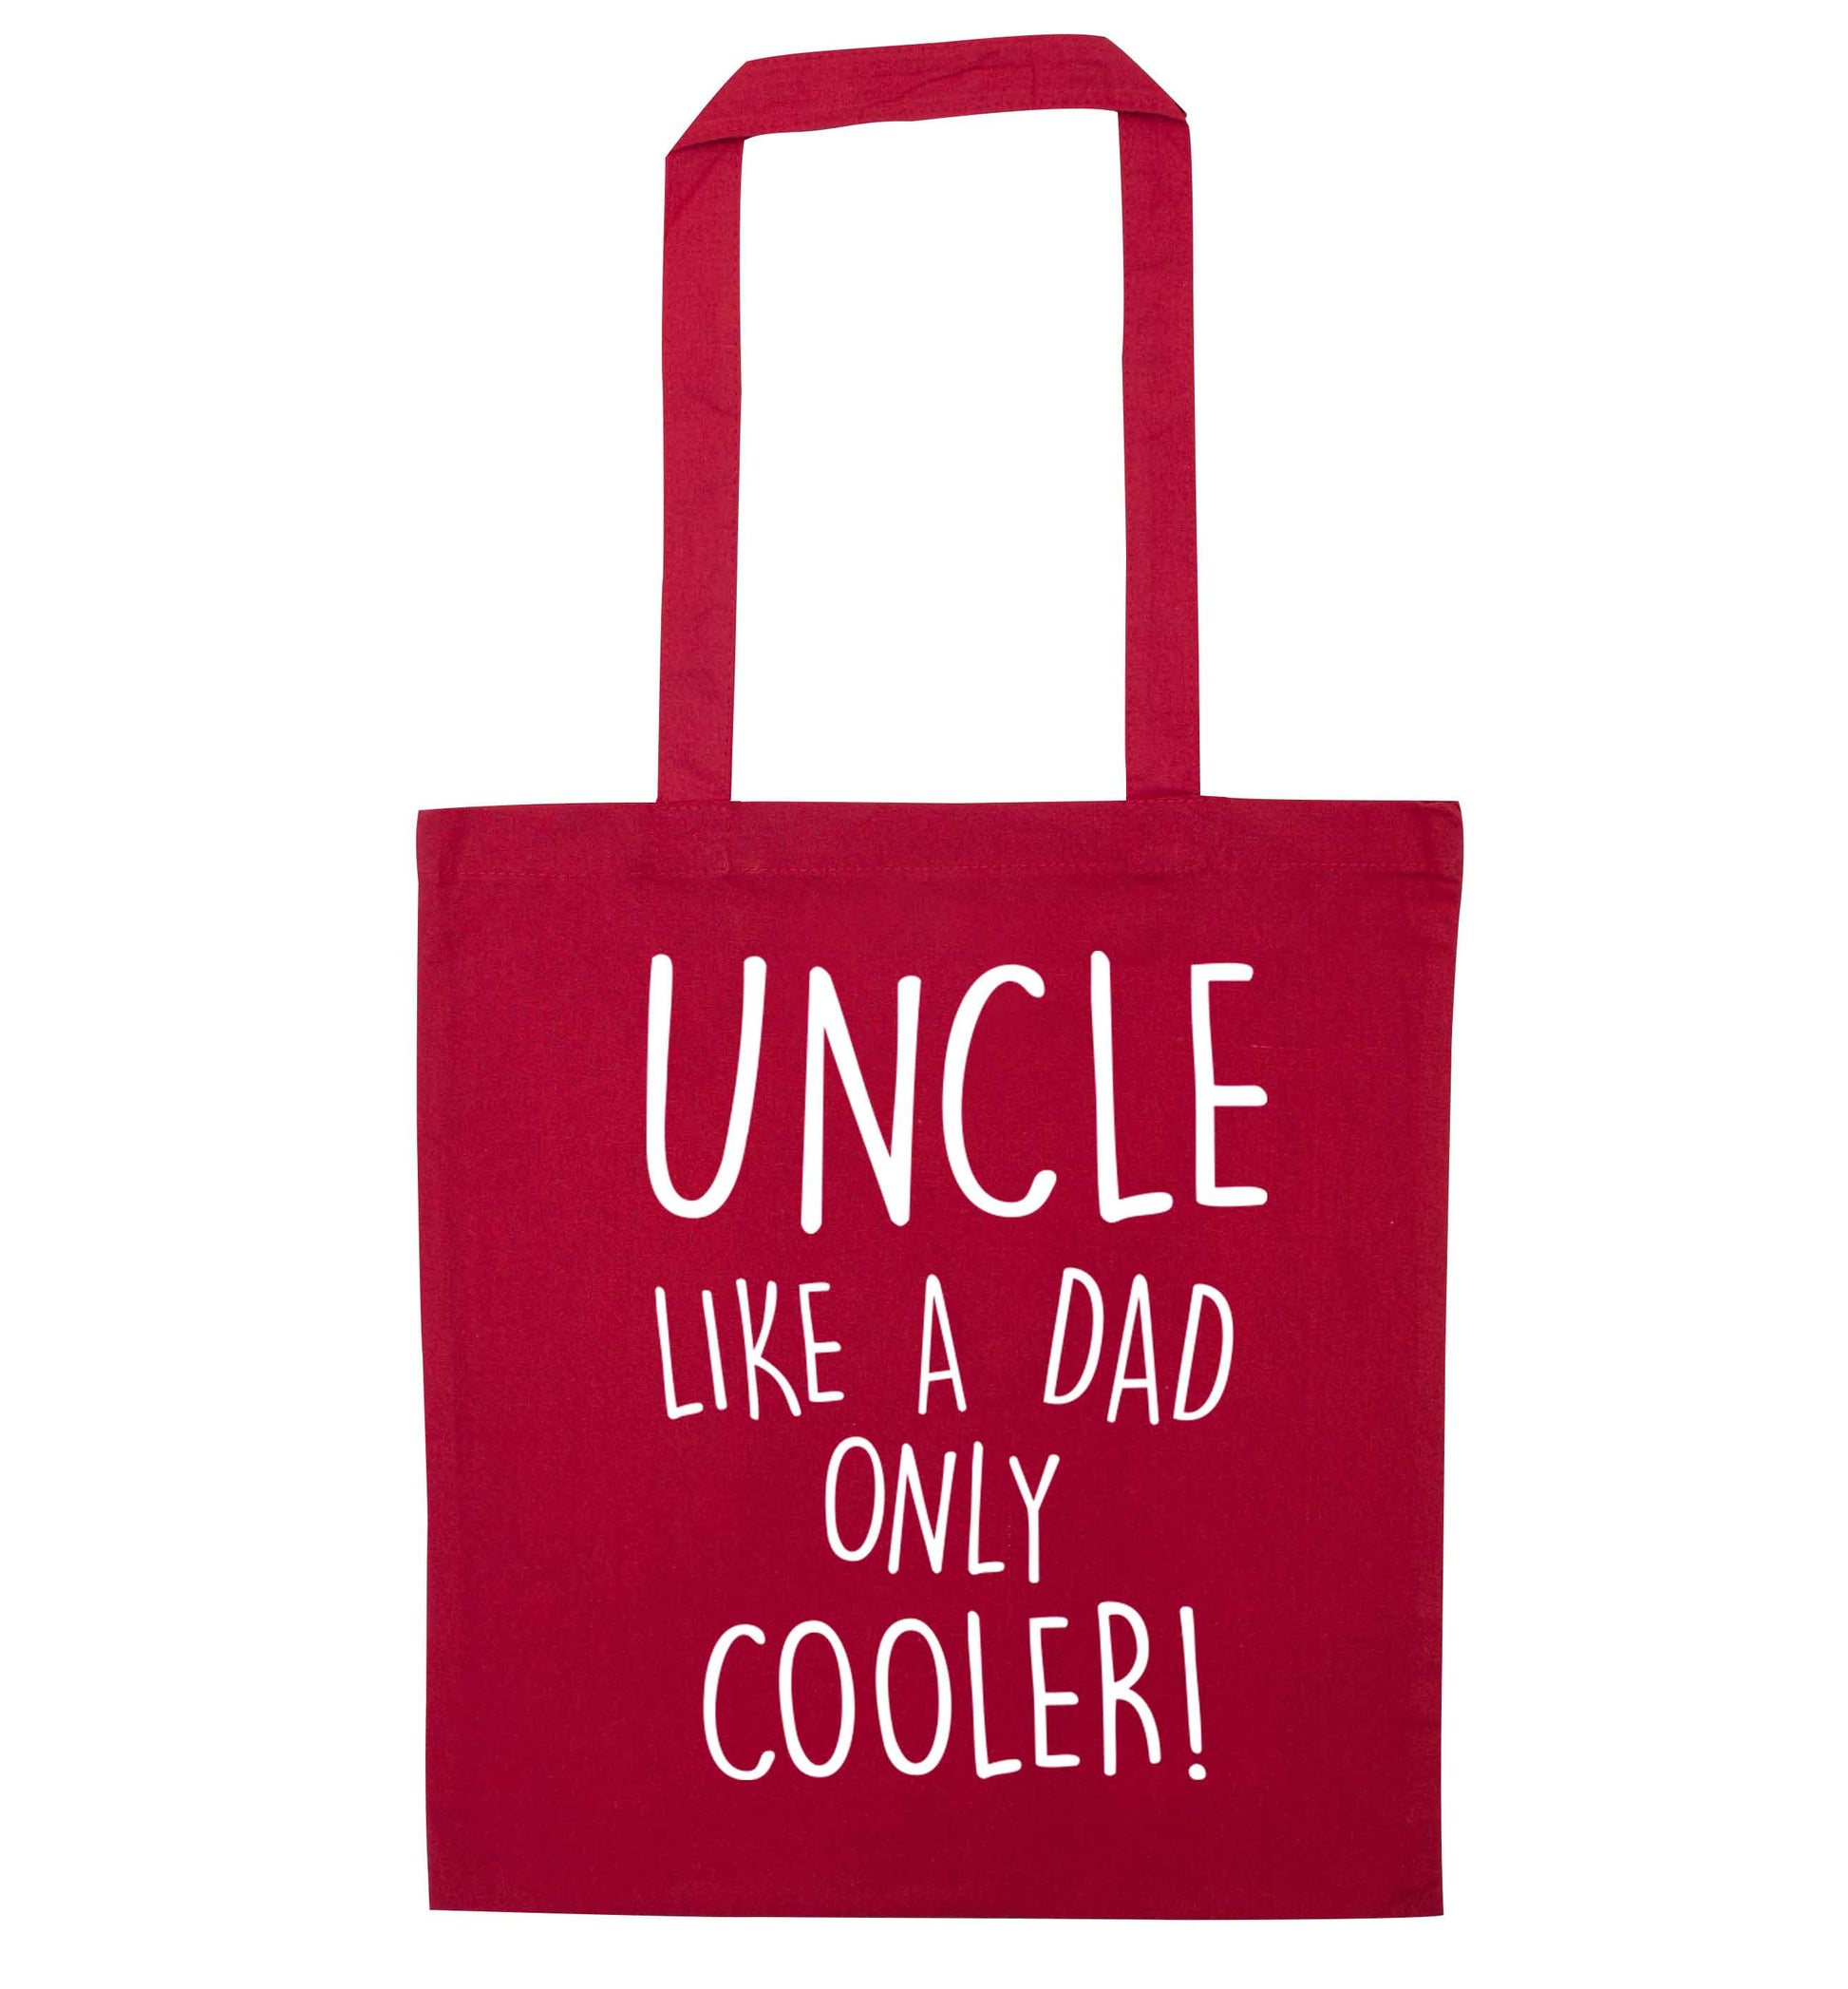 Uncle like a dad only cooler red tote bag